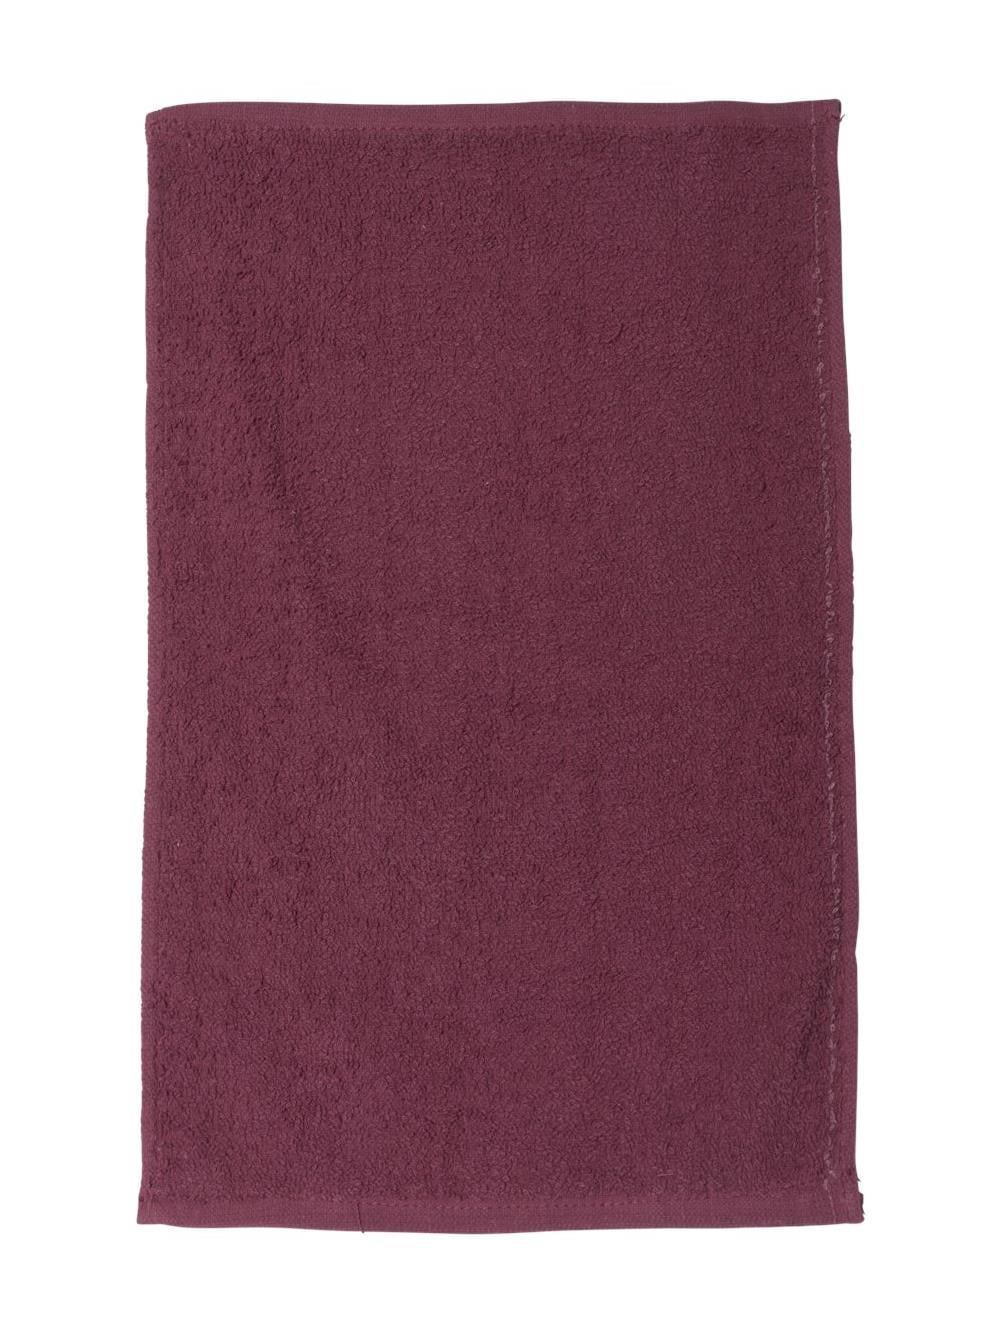 Maroon Color Terry Cotton Fingertip Towels Maroon, 12 12 Pack Budget Rally Towels Size 11w x 18h